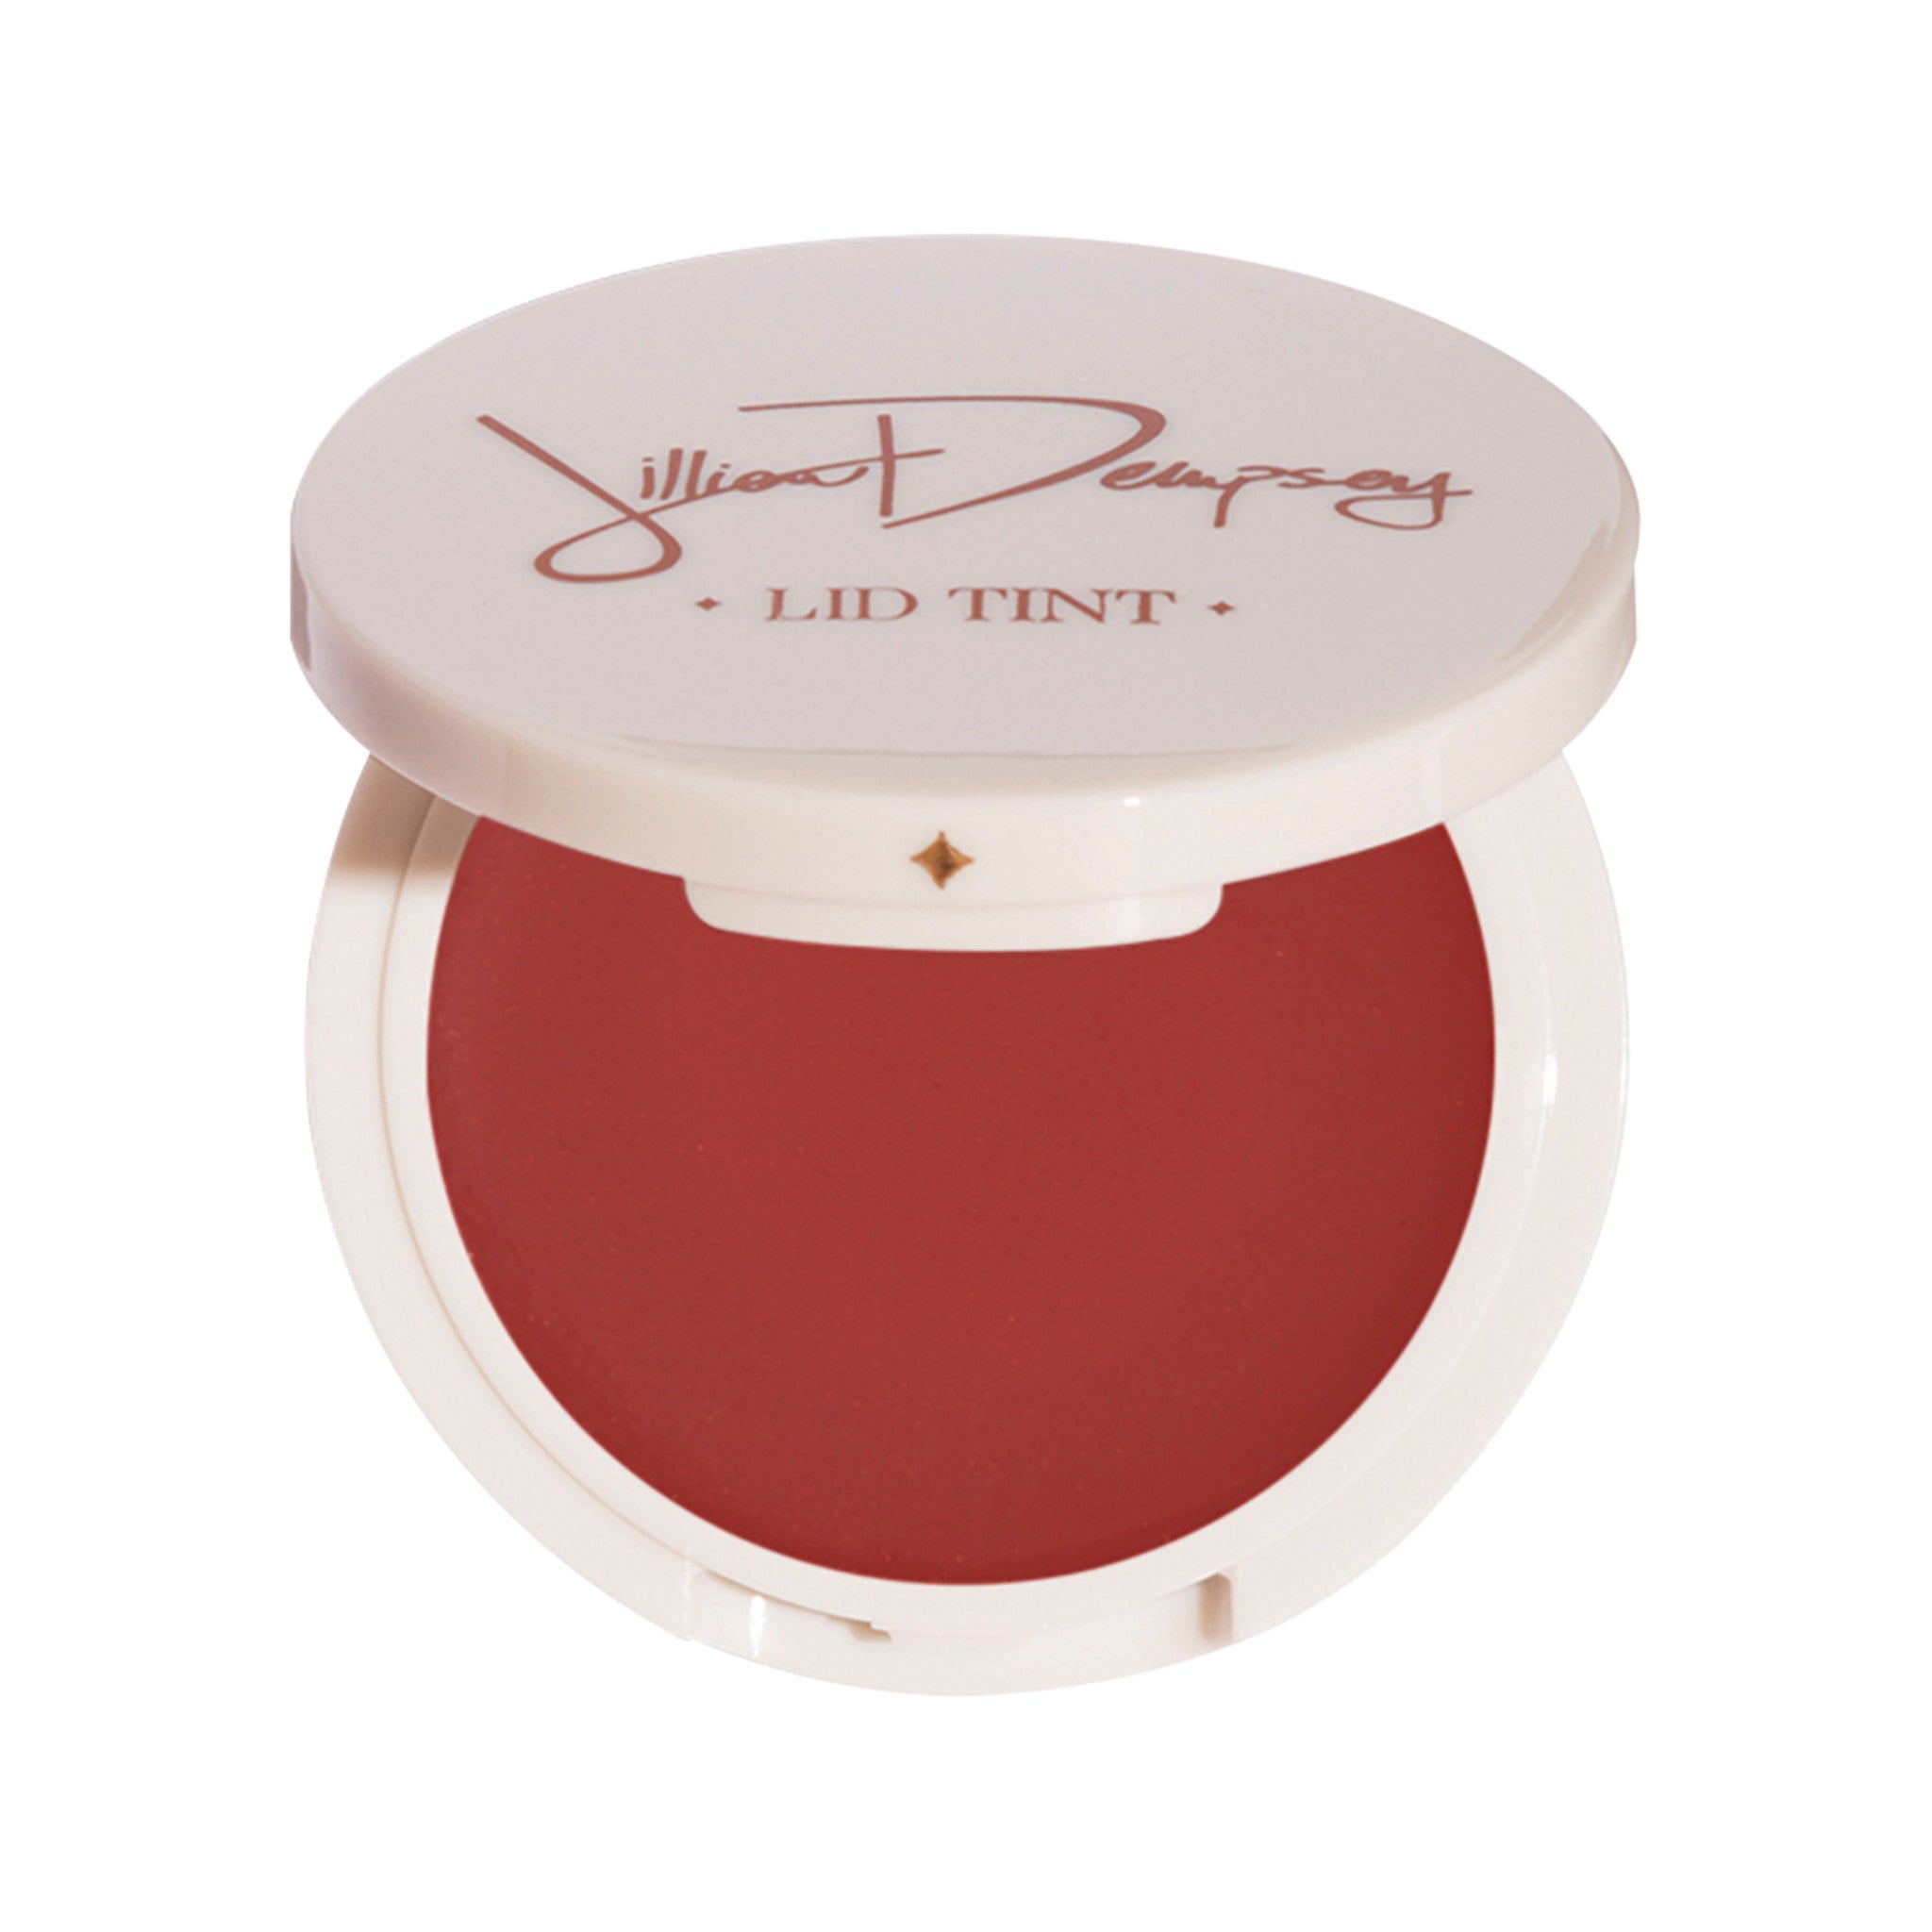 Jillian Dempsey Lid Tint Color/Shade variant: Ruby main image. This product is in the color red